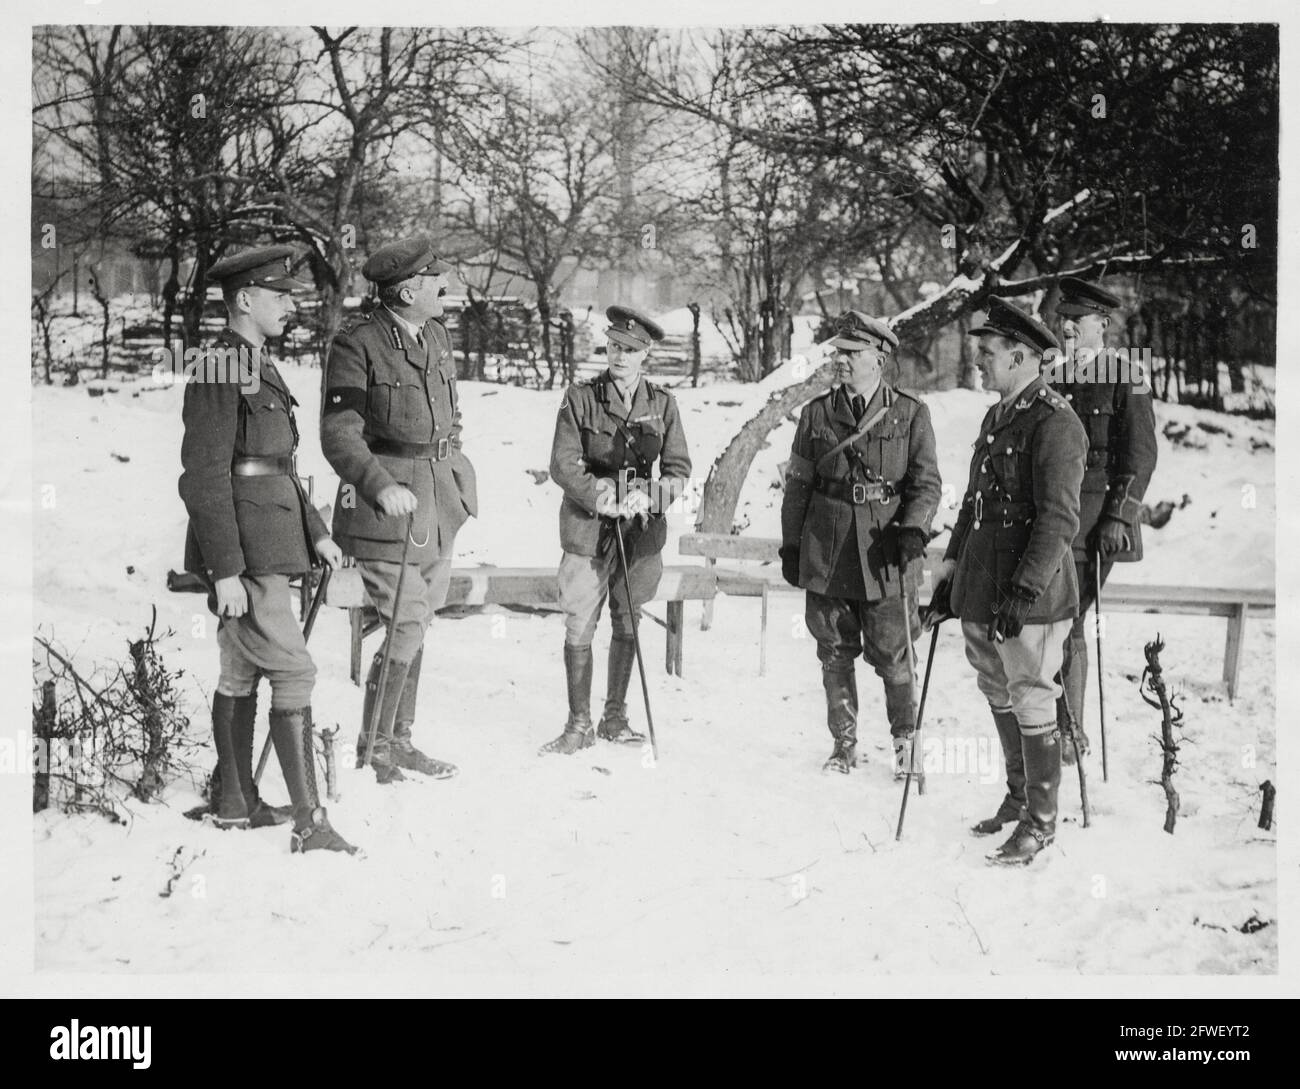 World War One, WWI, Western Front - The Prince of Wales talks to officers in the snow, France Stock Photo